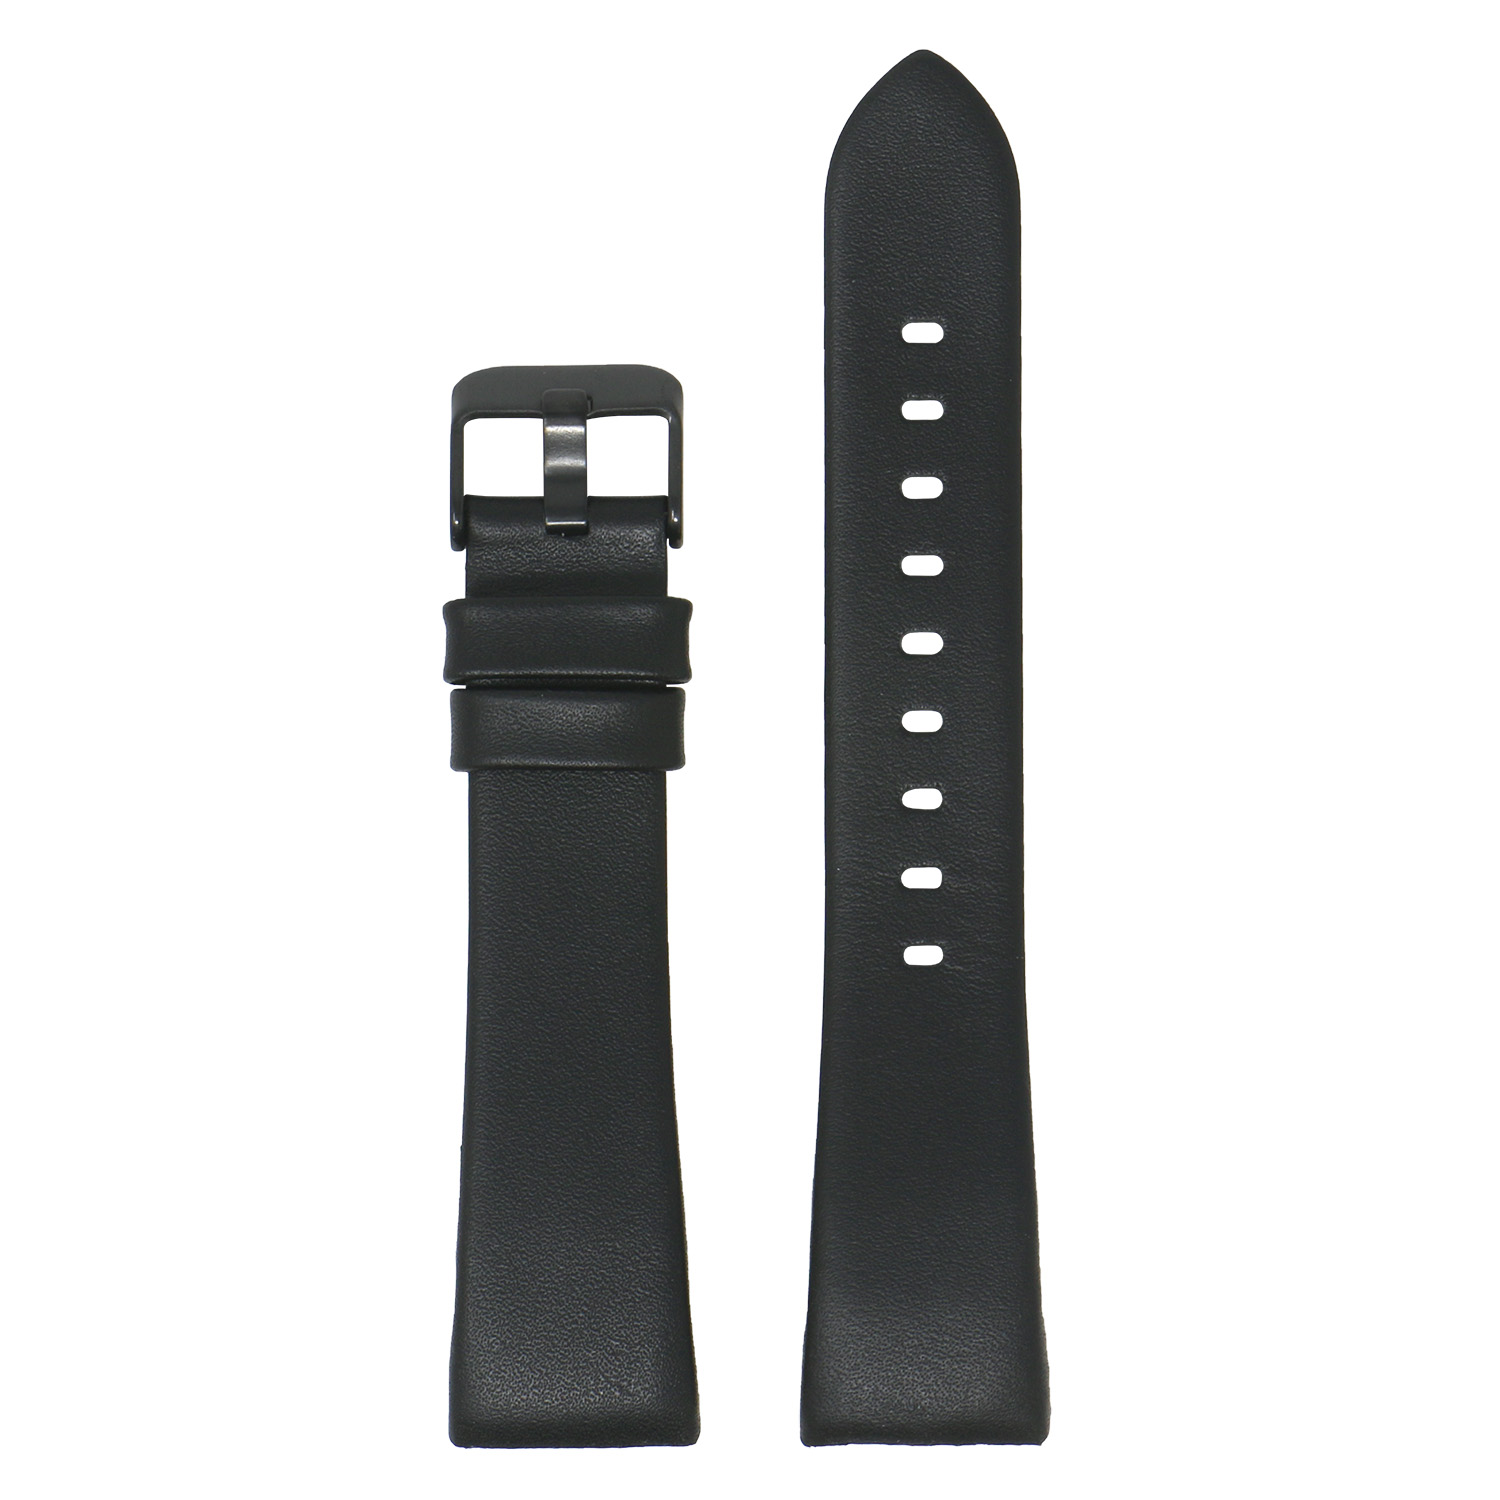 Fb.l15.1.mb Main Black (Black Buckle) StrapsCo Smooth Leather Watch Band Strap For Fitbit Charge 3